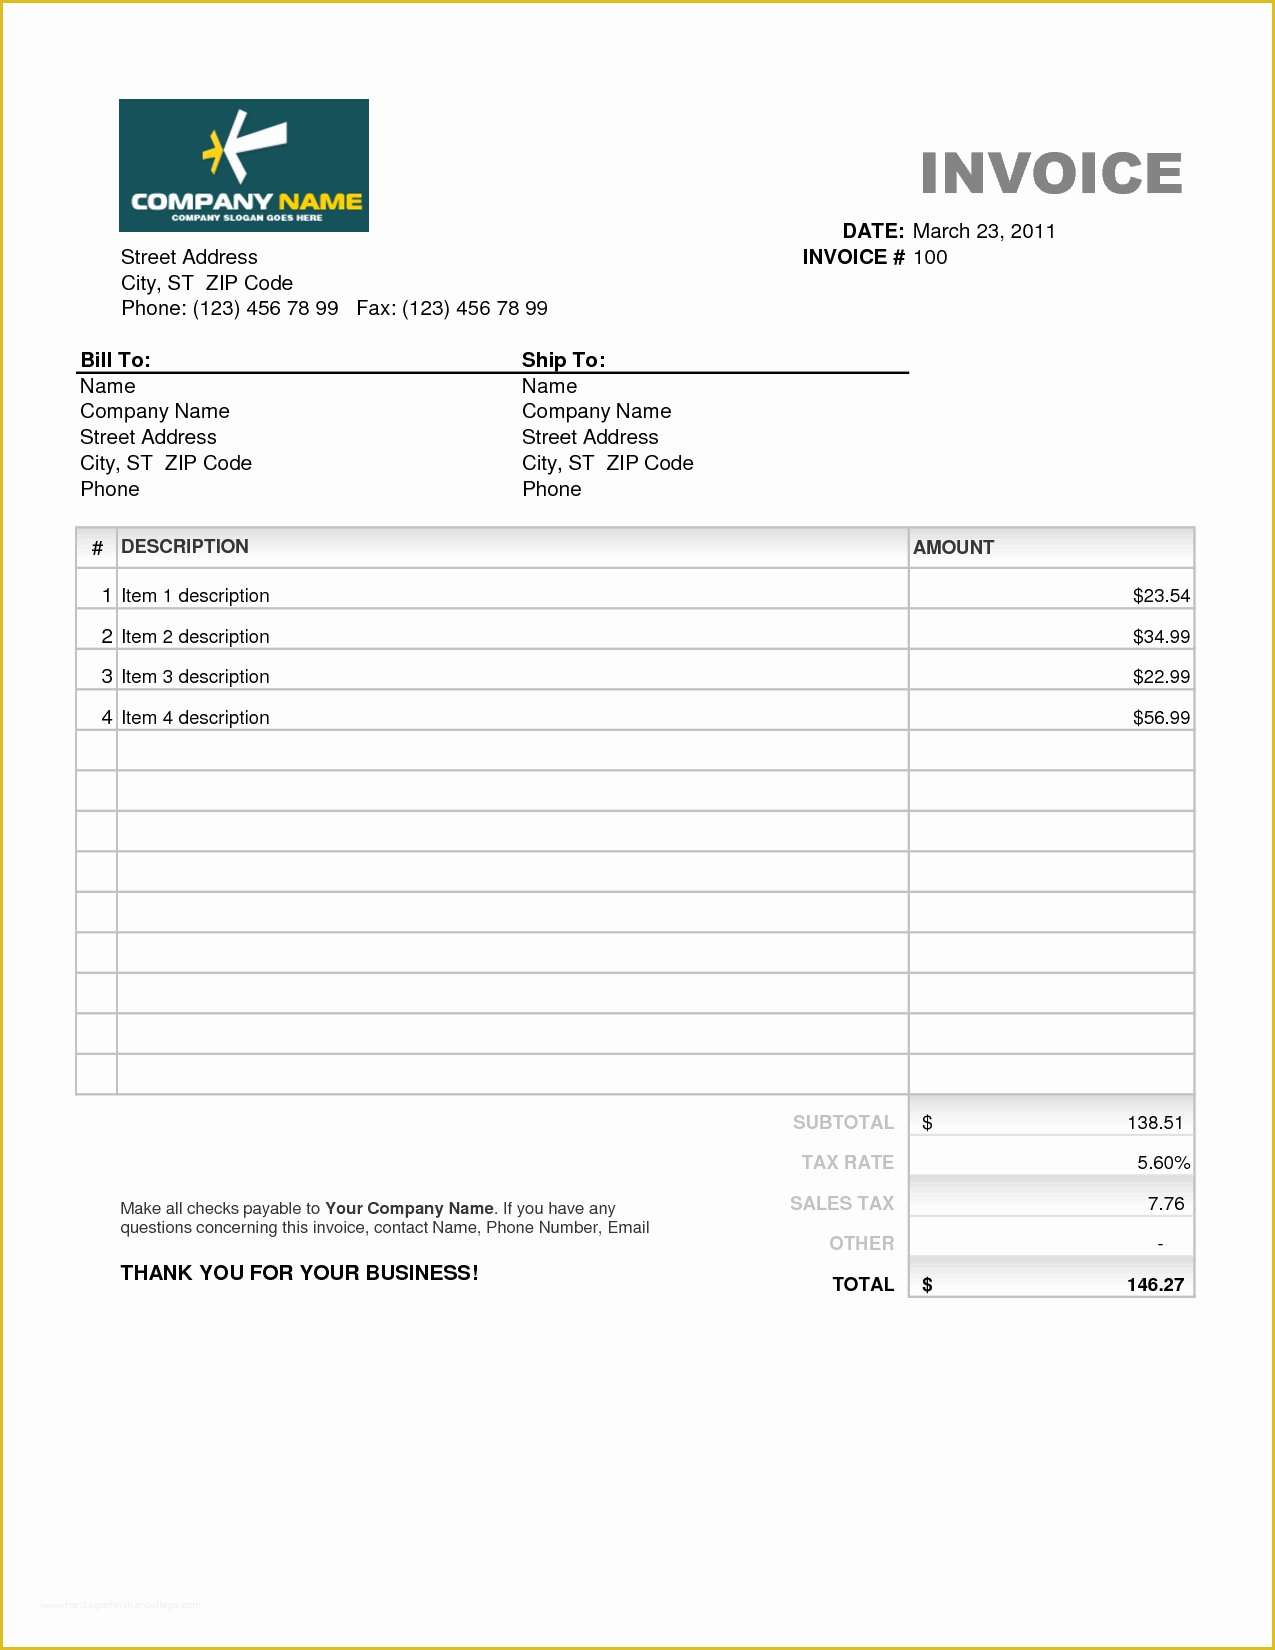 Invoice Template Excel Download Free Of Invoice Template Download Excel